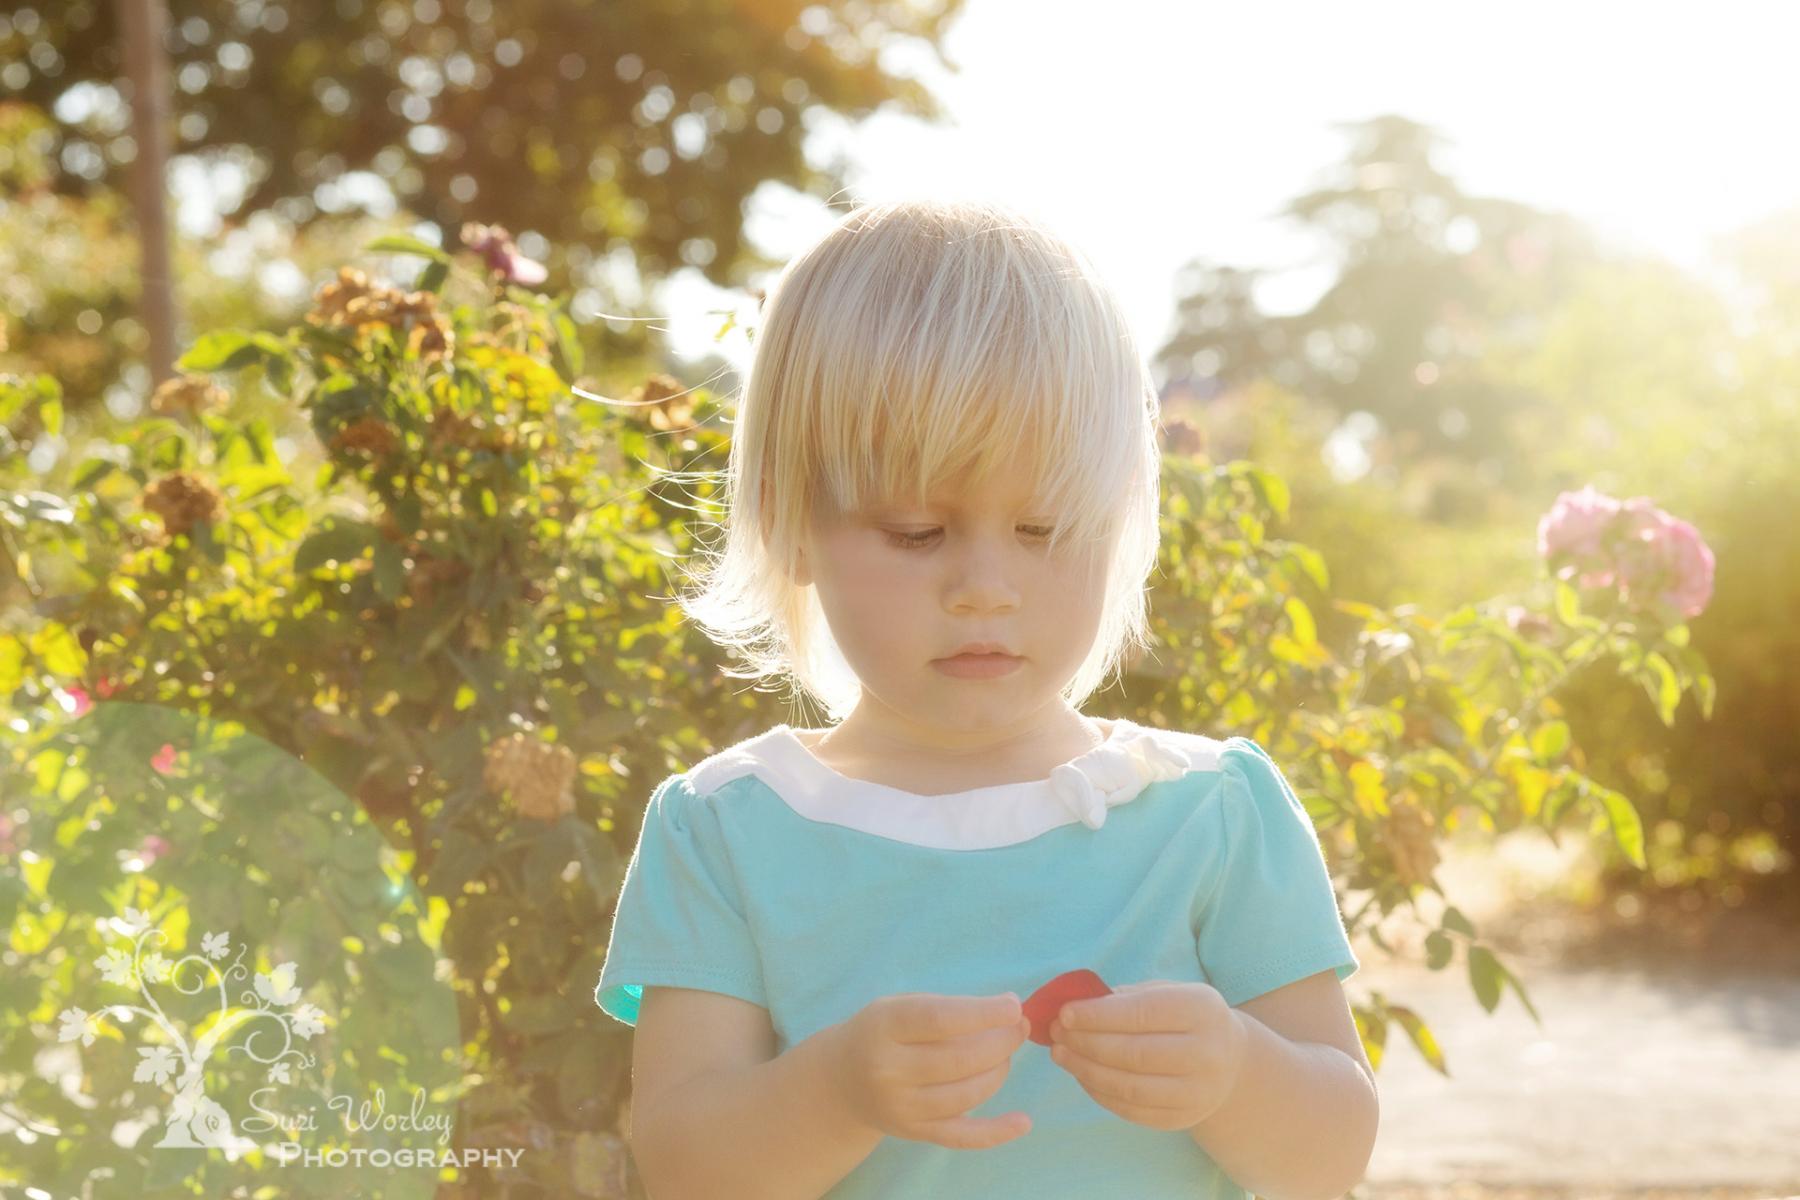 A toddler in the rose garden.  #SuziWorleyPhotography #Portraits #toddler #Daughter #flowers